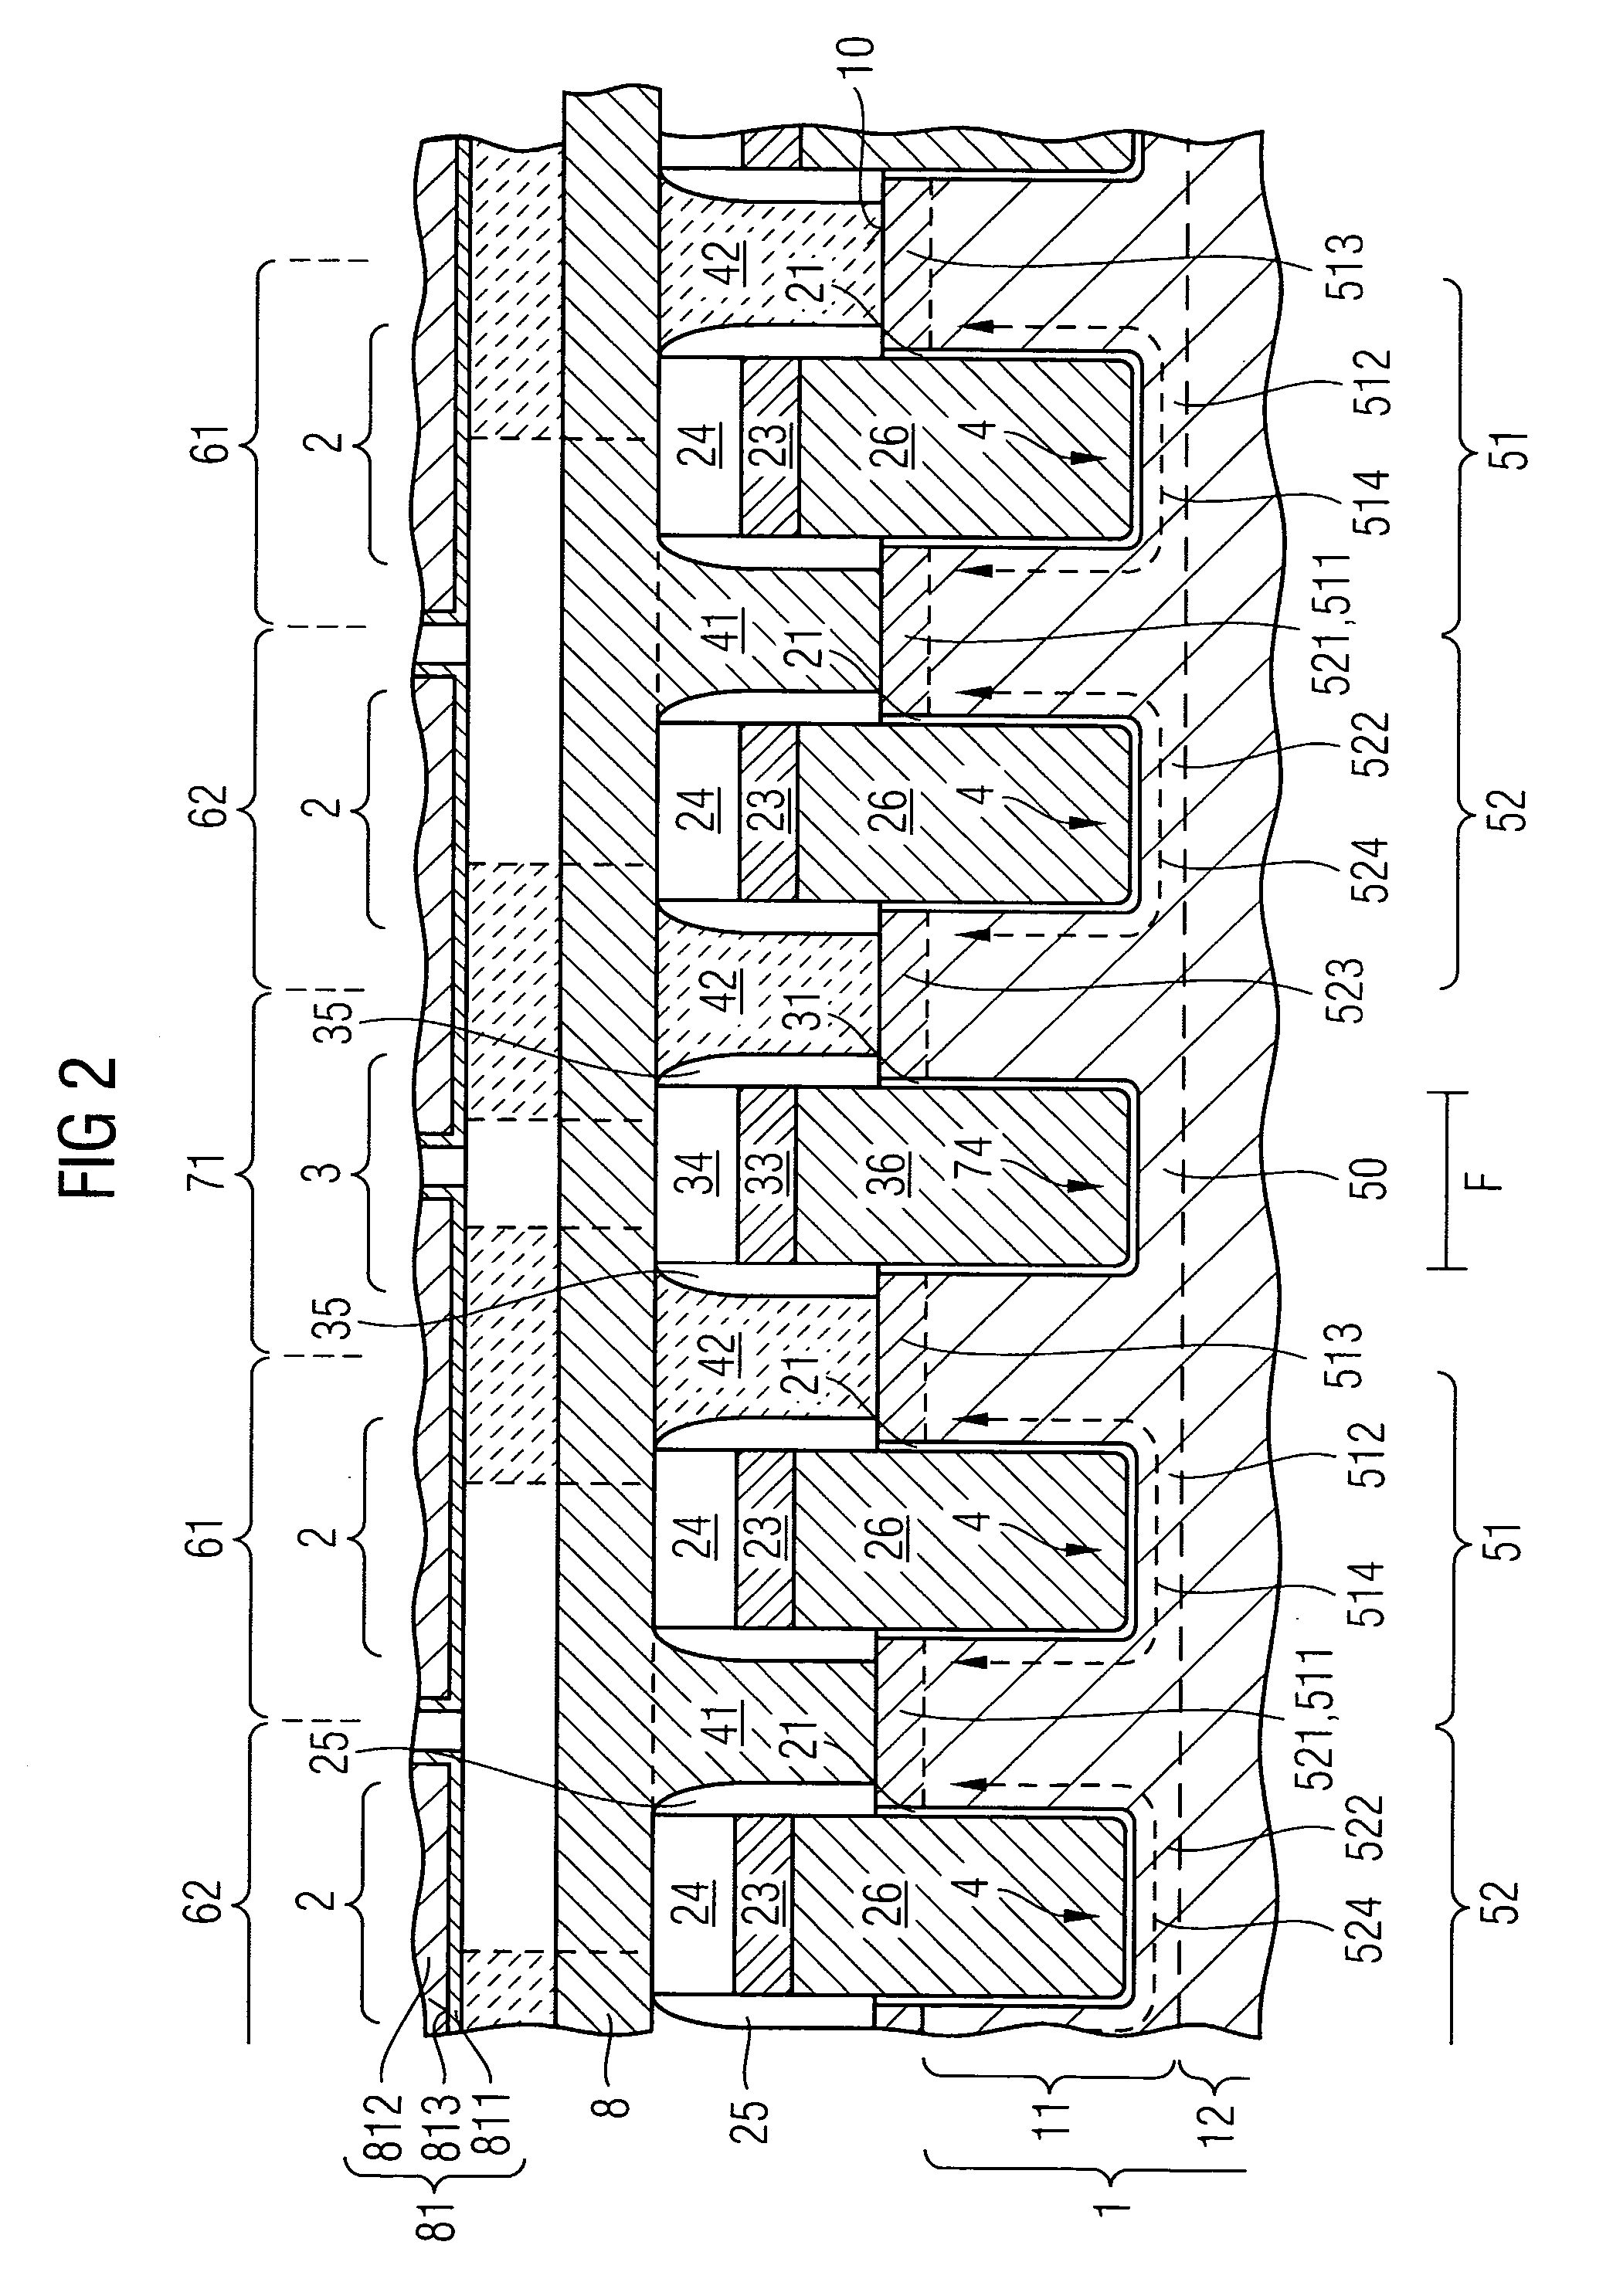 6F2 access transistor arrangement and semiconductor memory device